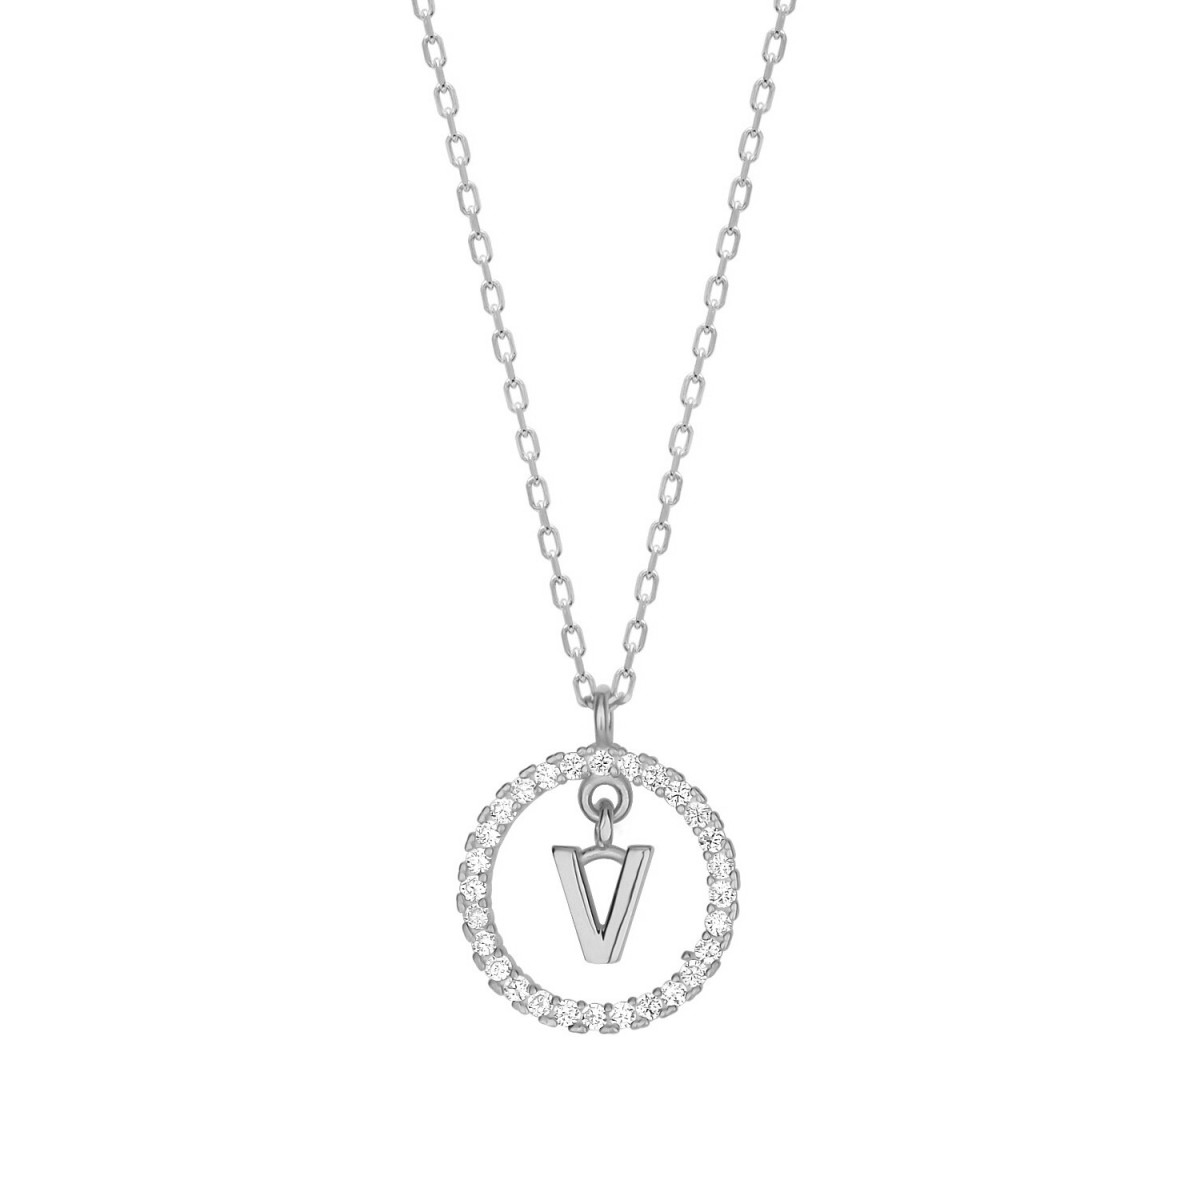 NECKLACE WITH LETTER V AND WHITE HOOP PENDANT